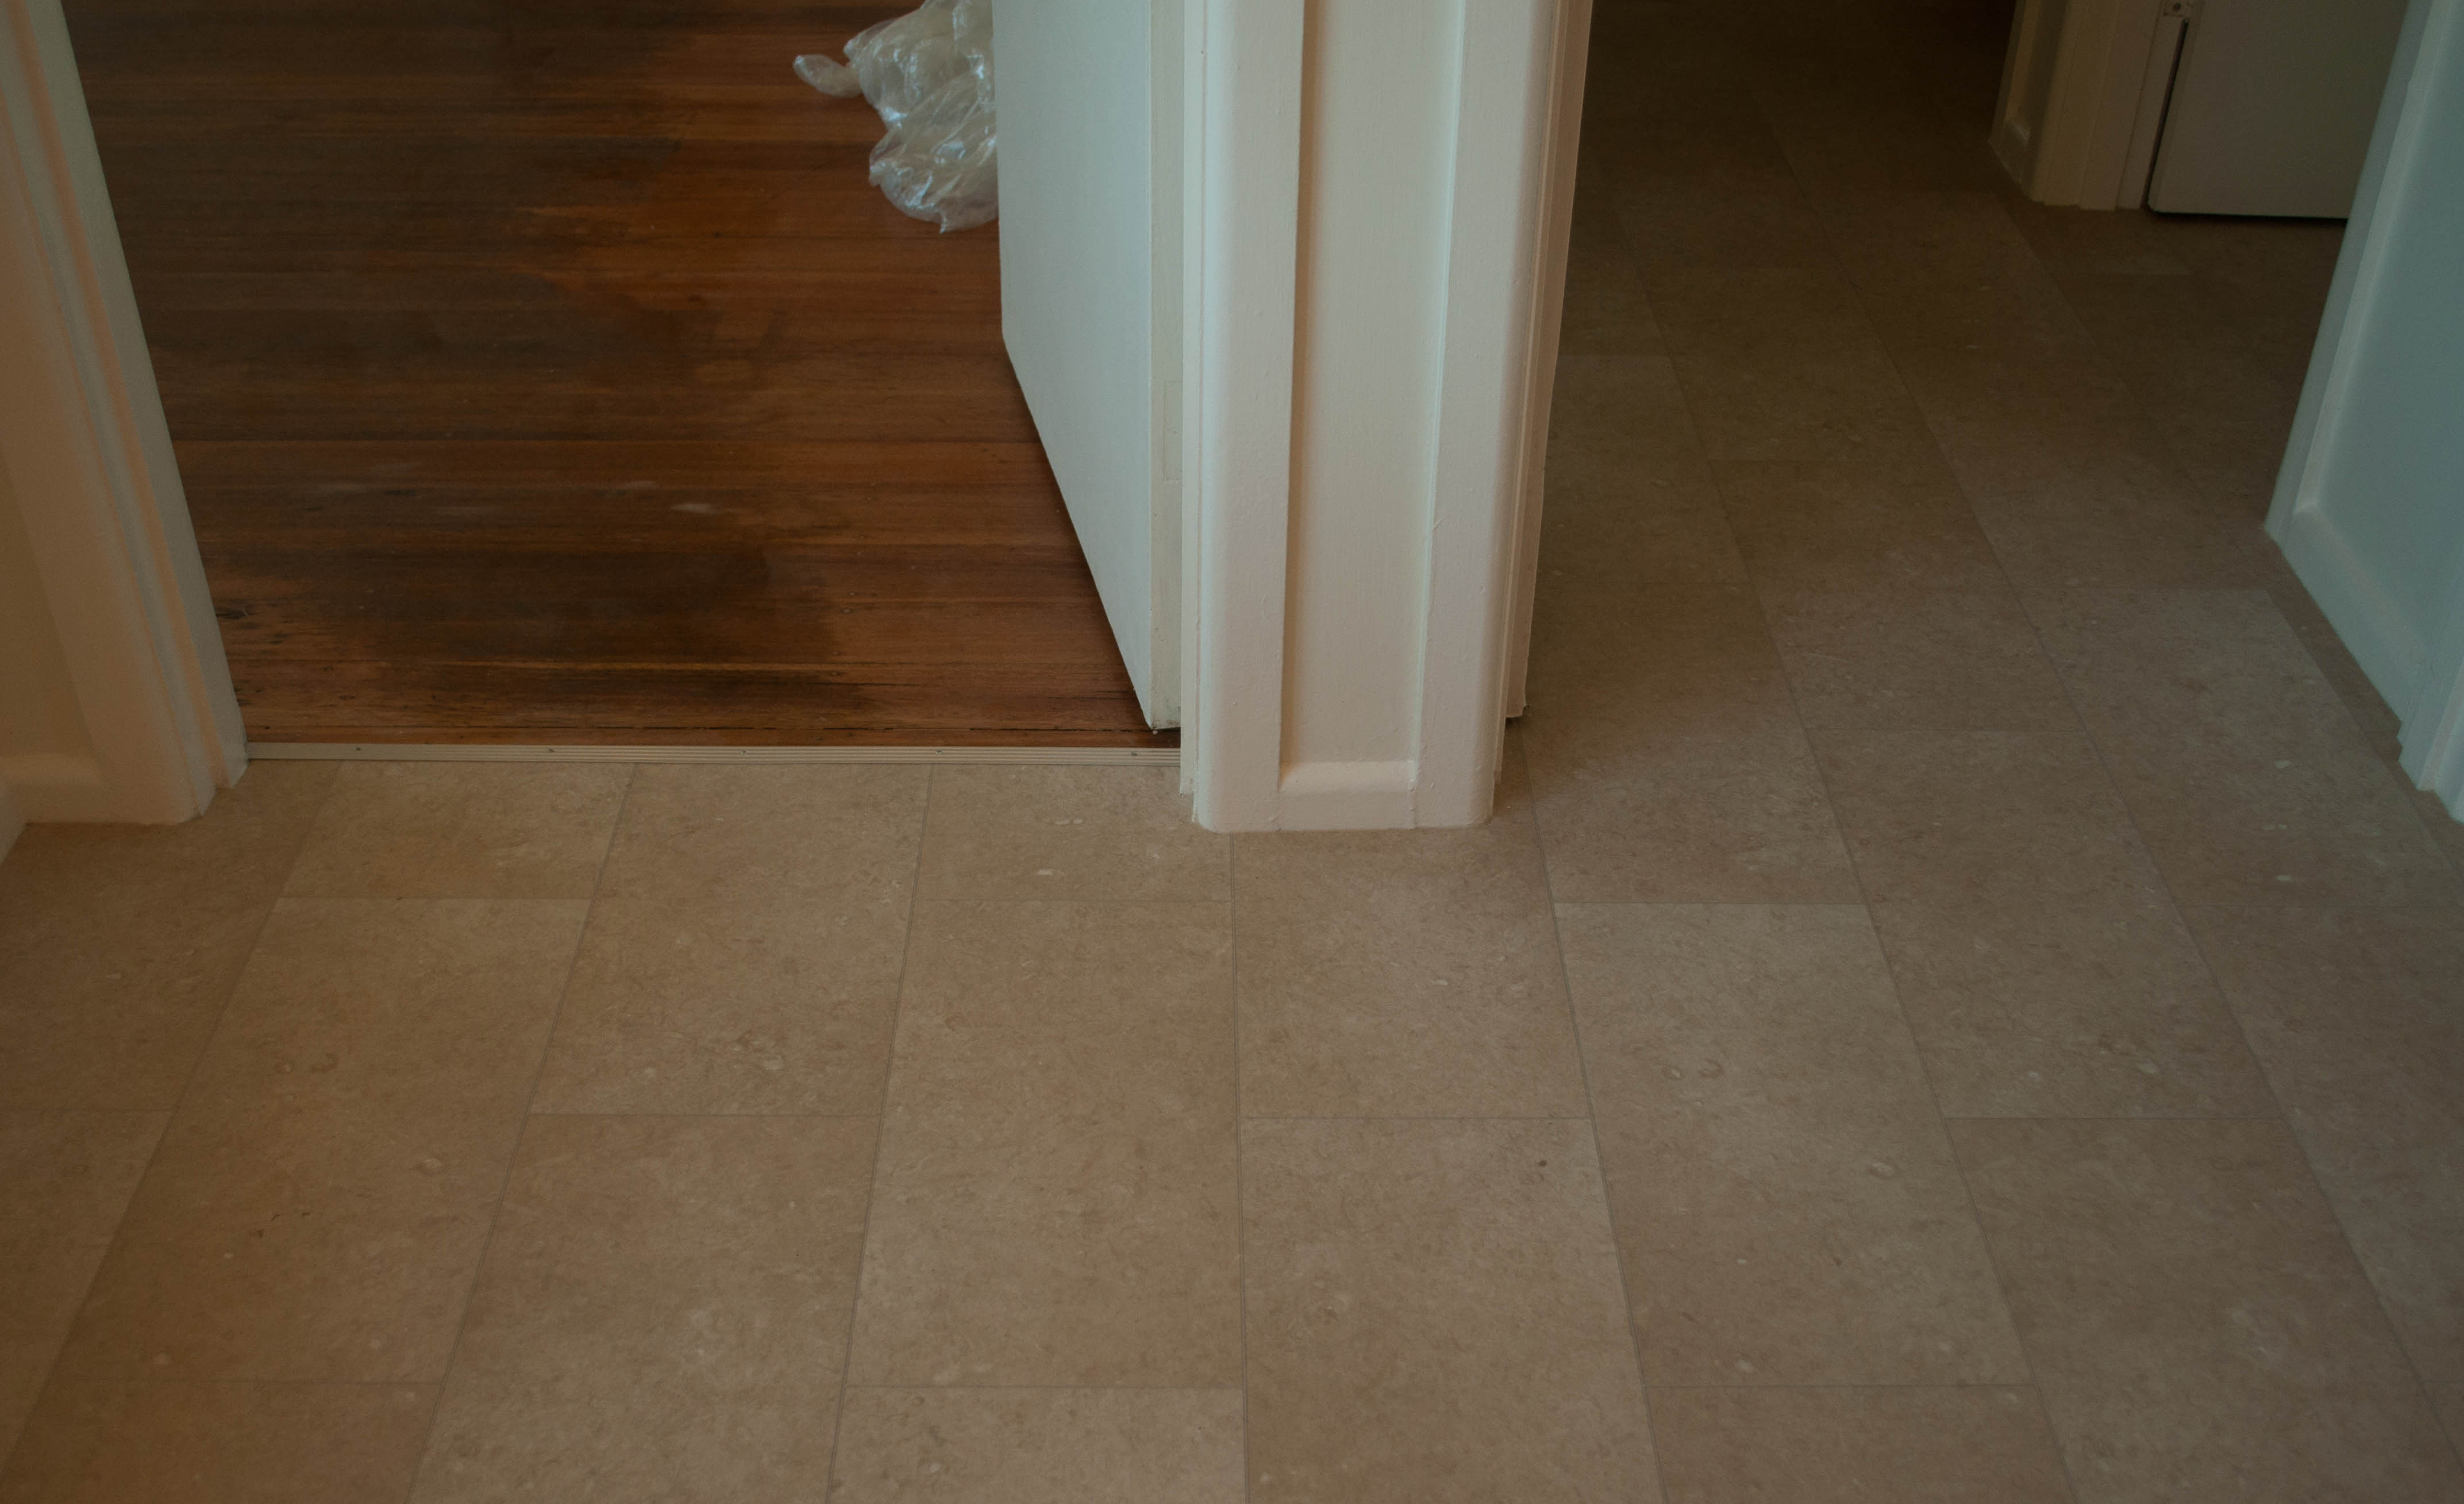 showing a dommesitic vinyl with a tile look pattern on its surface with beige colors, installed in a kitchen , by
          Concord Floors, in a home in Melton, Vic 3337.